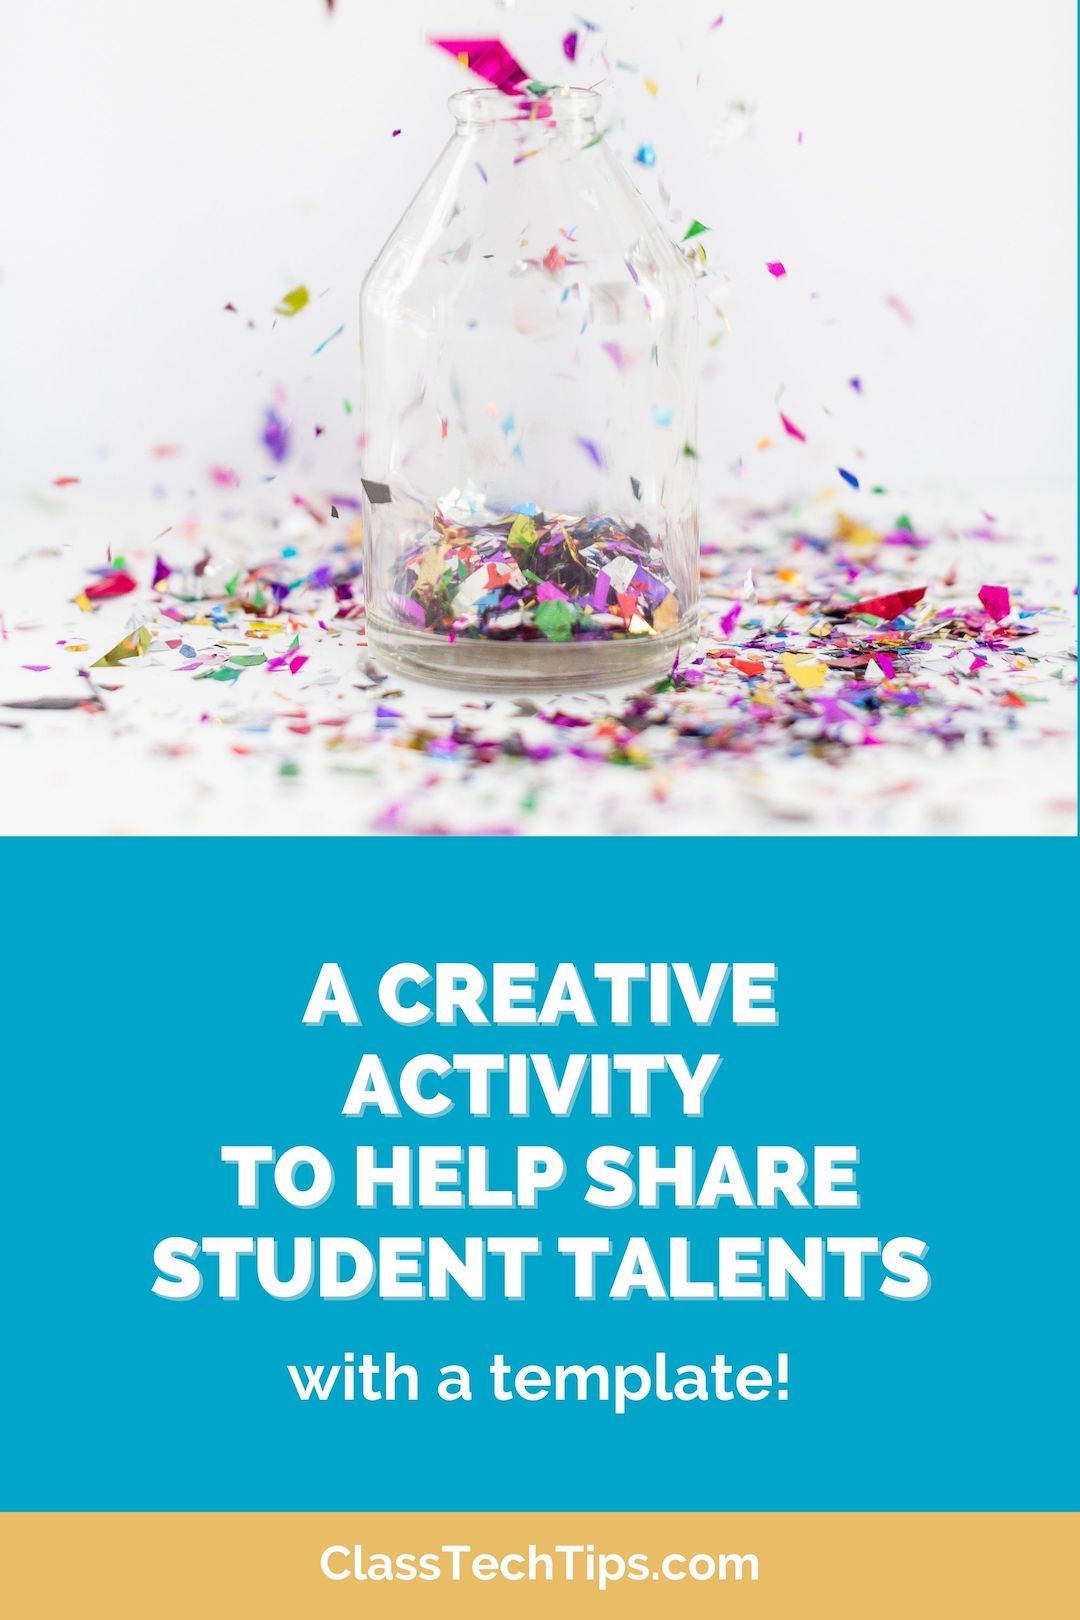 This creative activity all about honoring student (and educator) talents a traditional assessment might not be able to capture. 